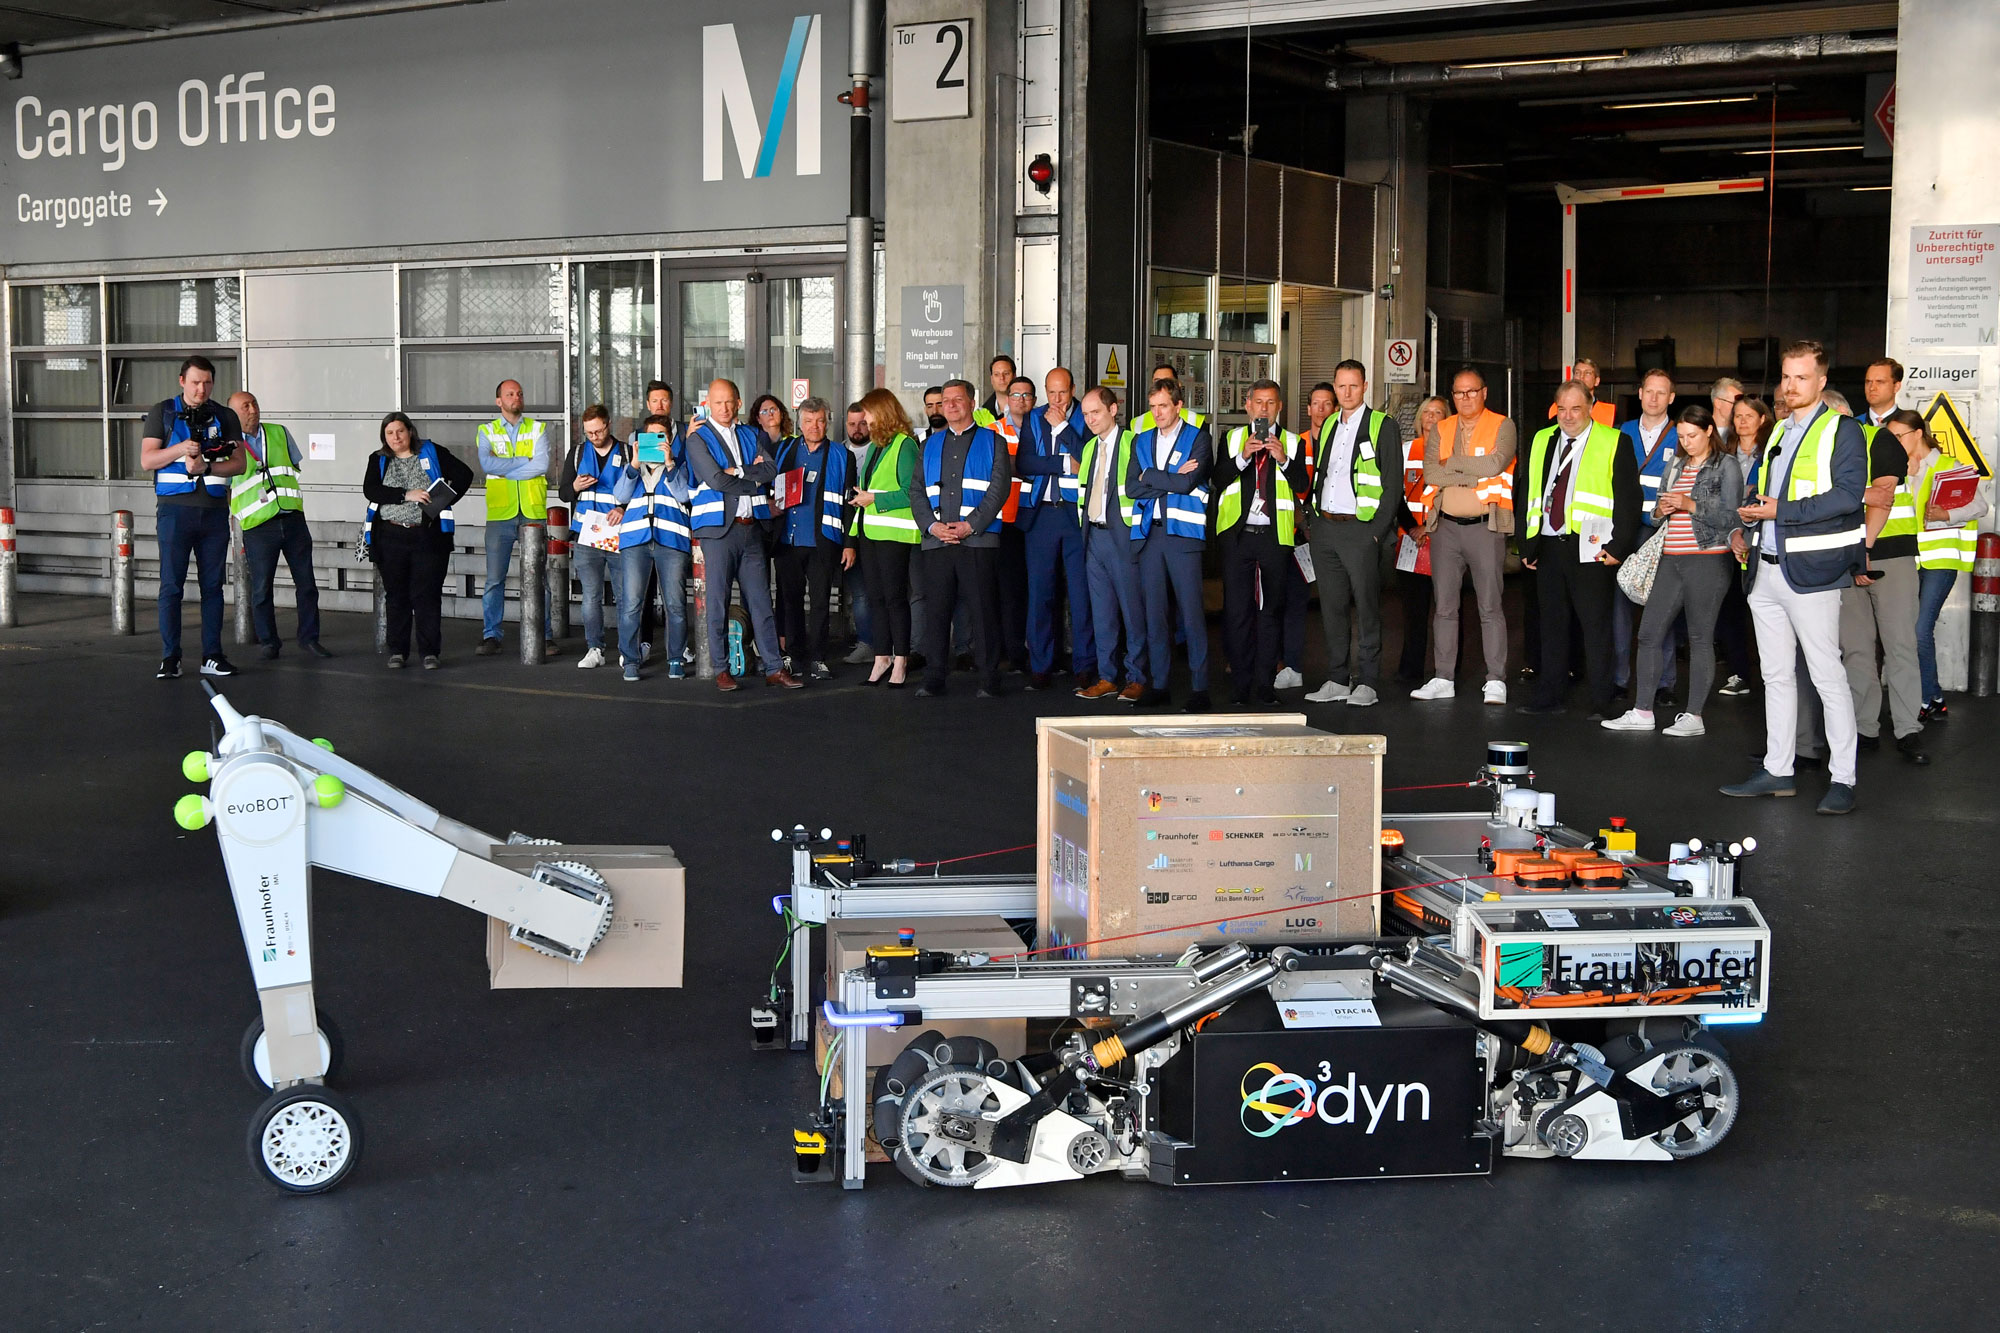 Robots, including the robot dog Spot, the omnidirectional transport robot O³dyn and the evoBot, handling air cargo at Munich Airport, surrounded by industry players in the background during the presentation of the DTAC research project.